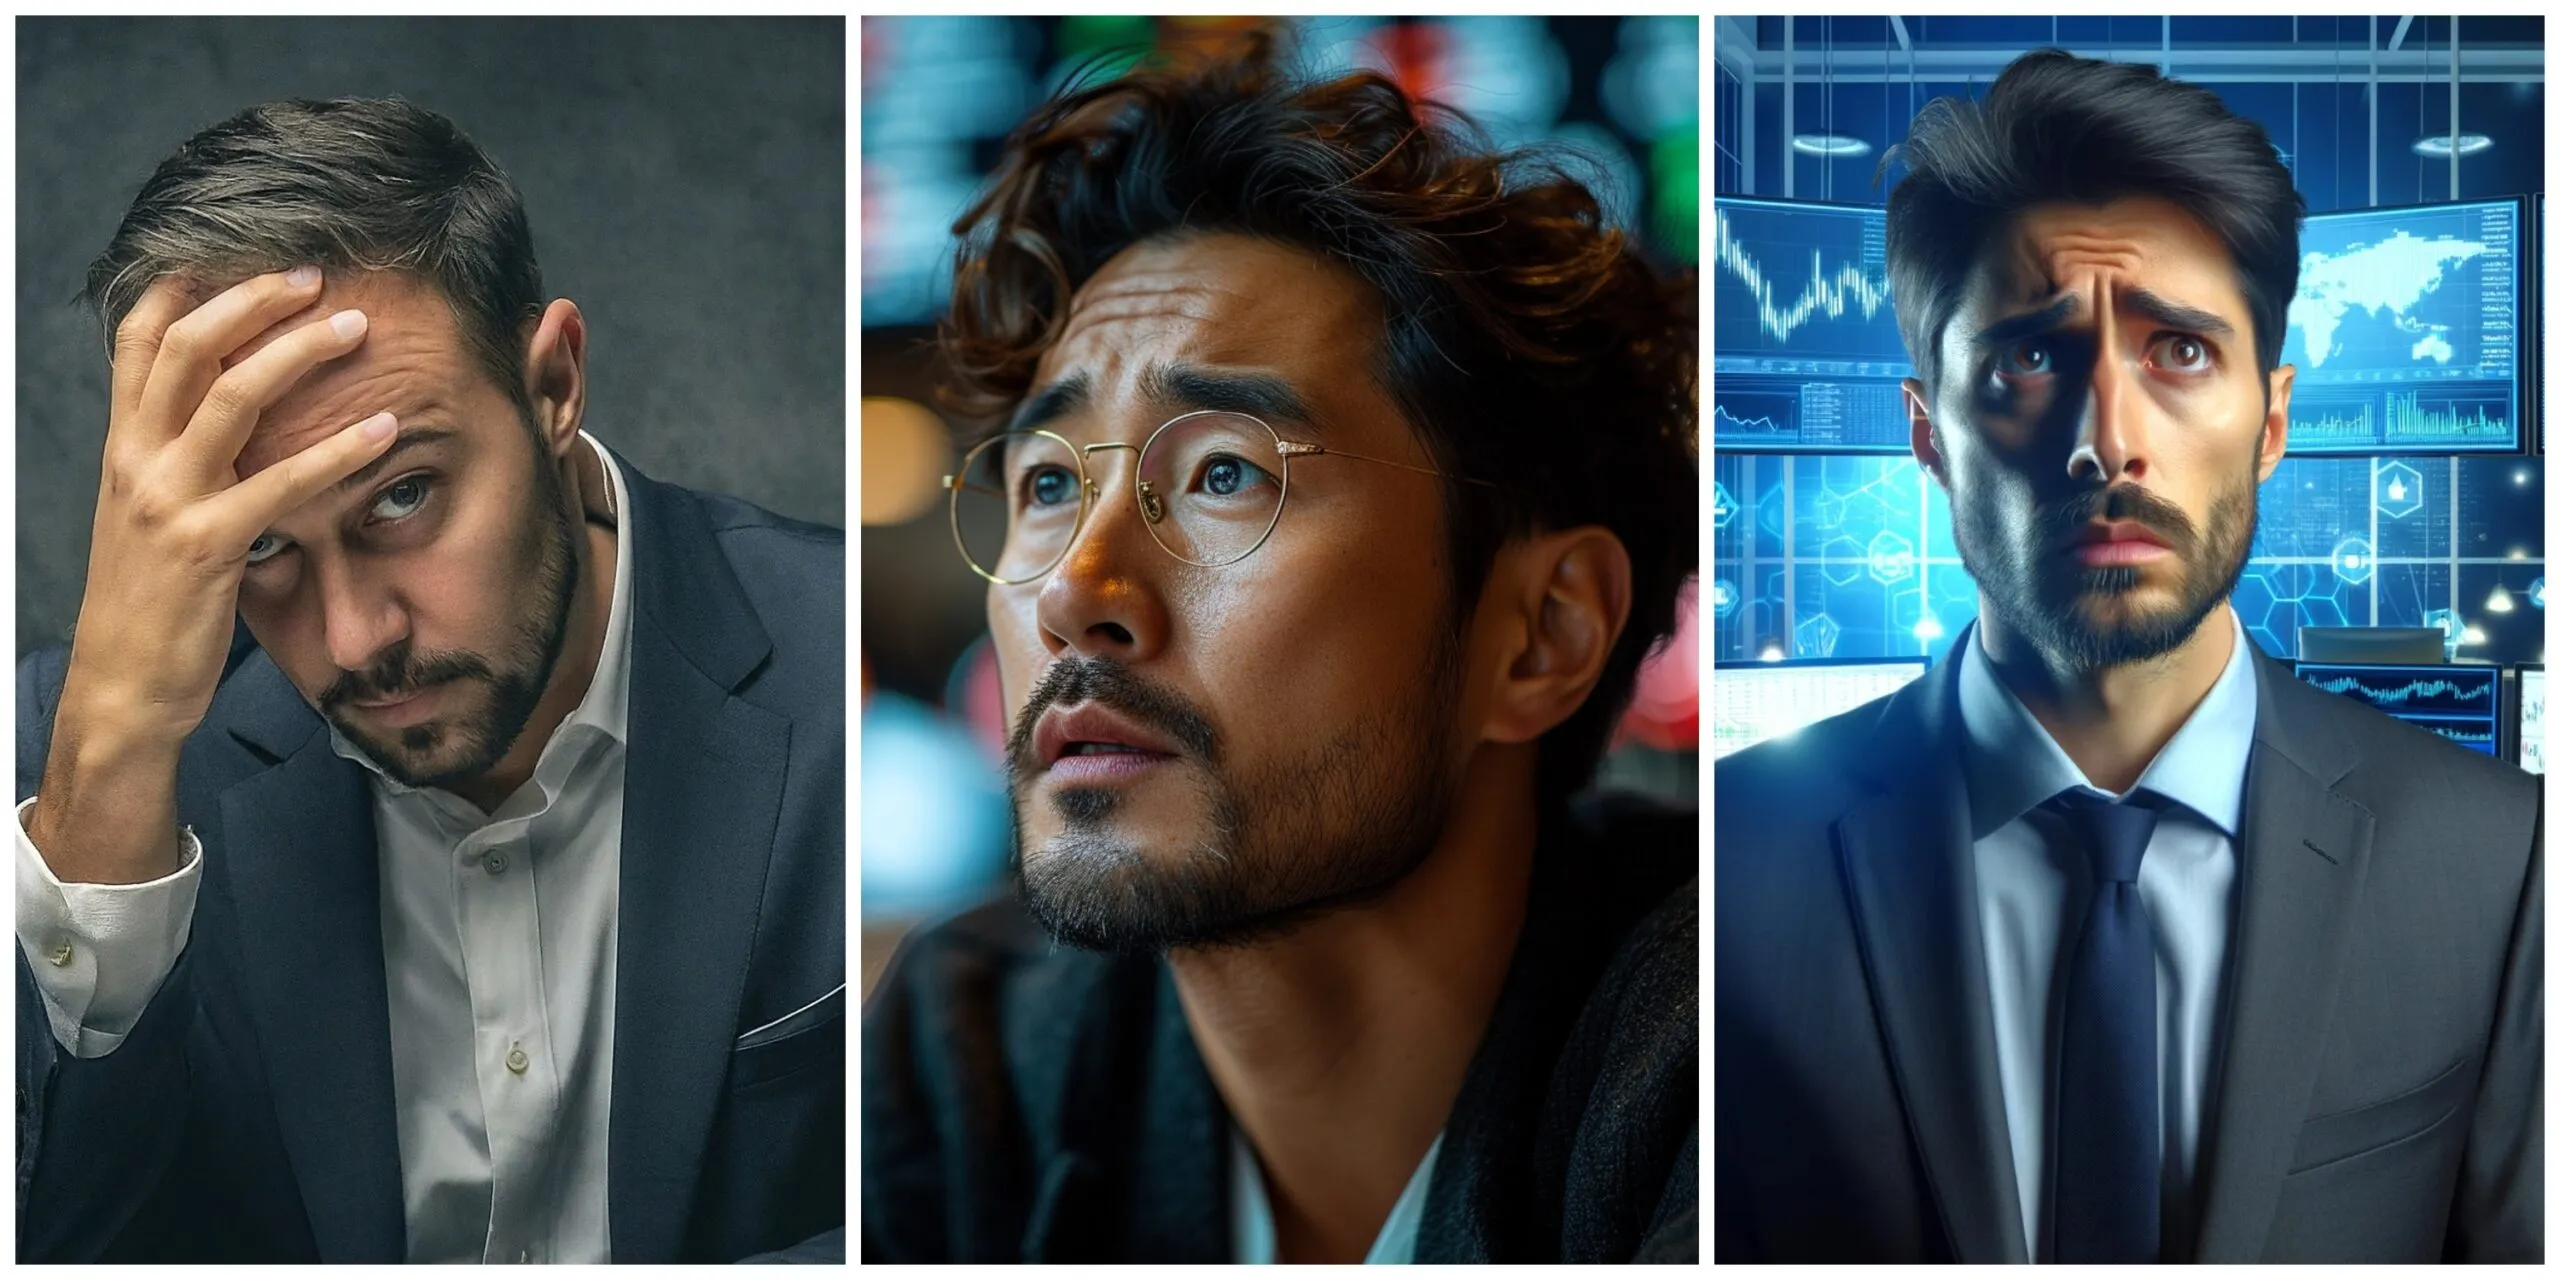 Comparison of generations for the prompt "Photo of a cryptocurrency trader with worried expression"